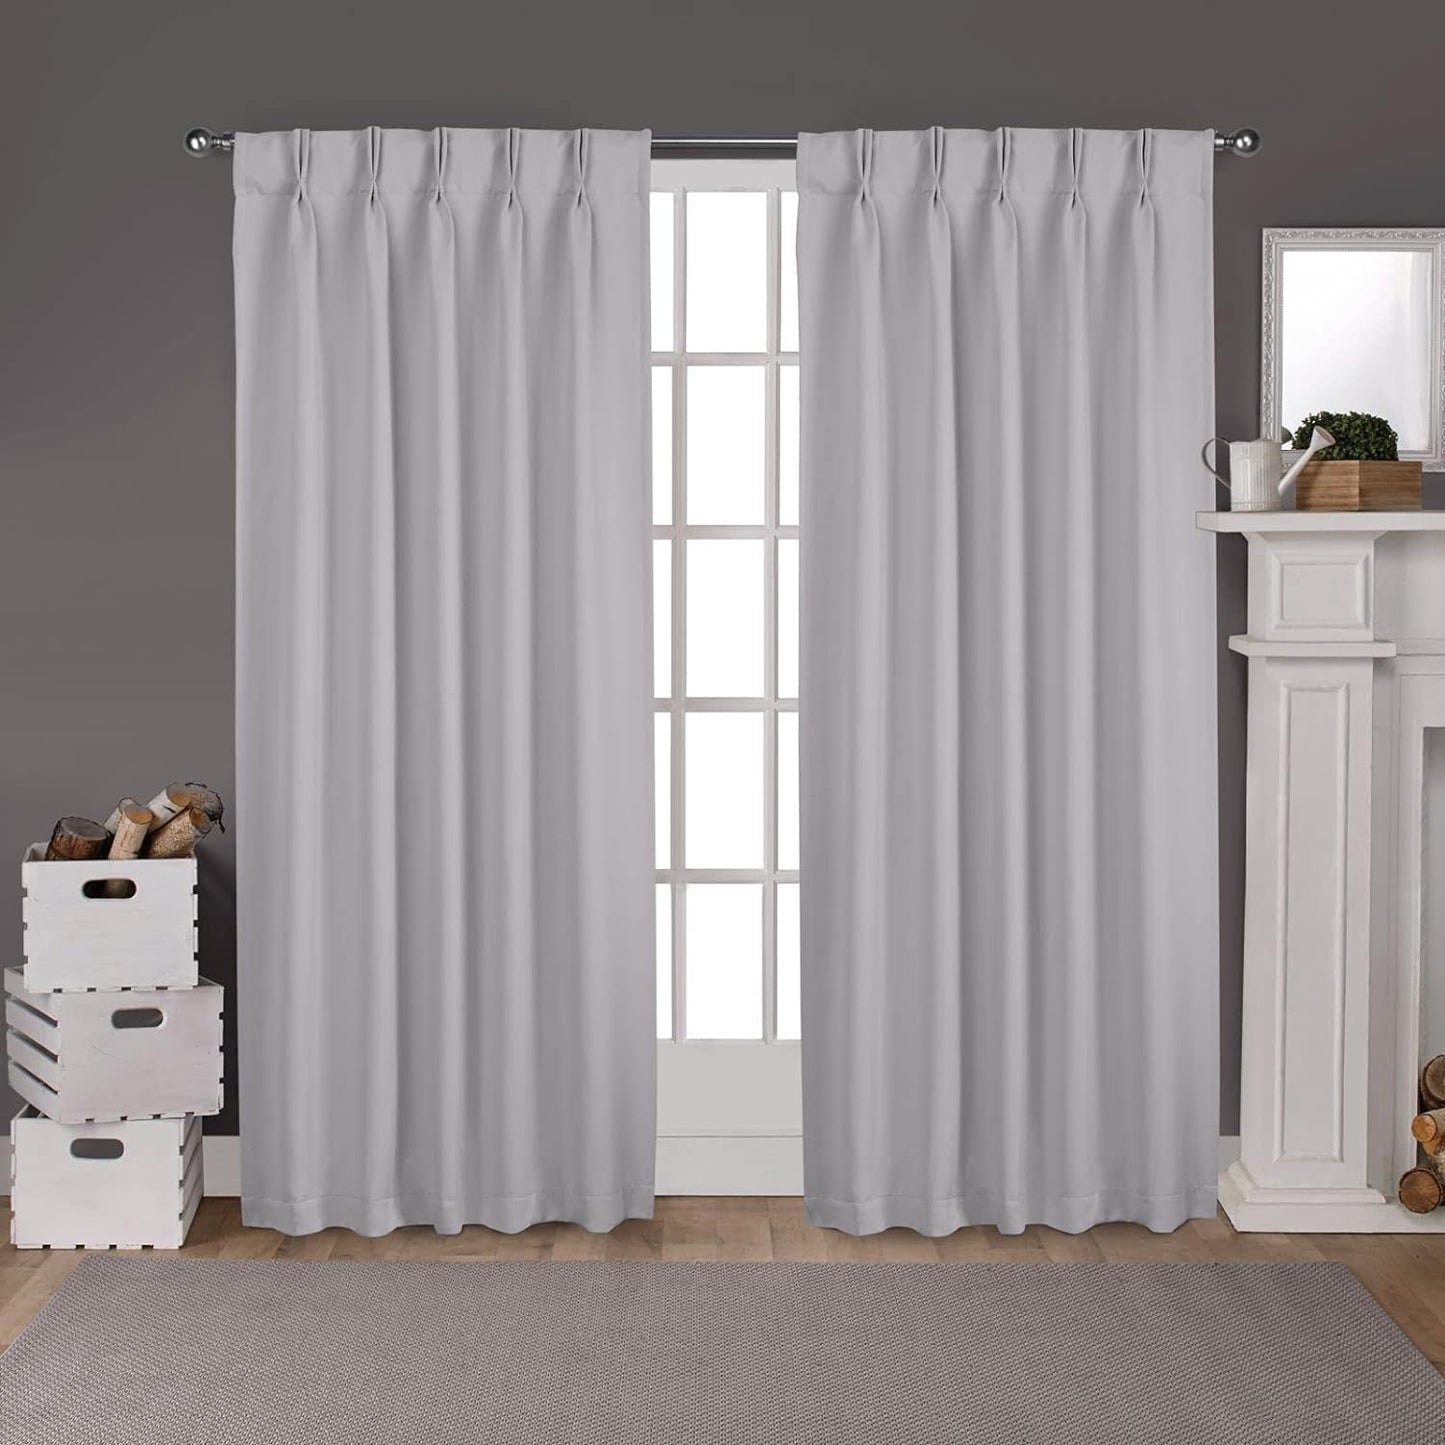 Exclusive Home Sateen Twill Woven Room Darkening Blackout Pinch Pleat/Hidden Tab Top Curtain Panel Pair, 63" Length, Charcoal  Exclusive Home Curtains Silver 96" Length 